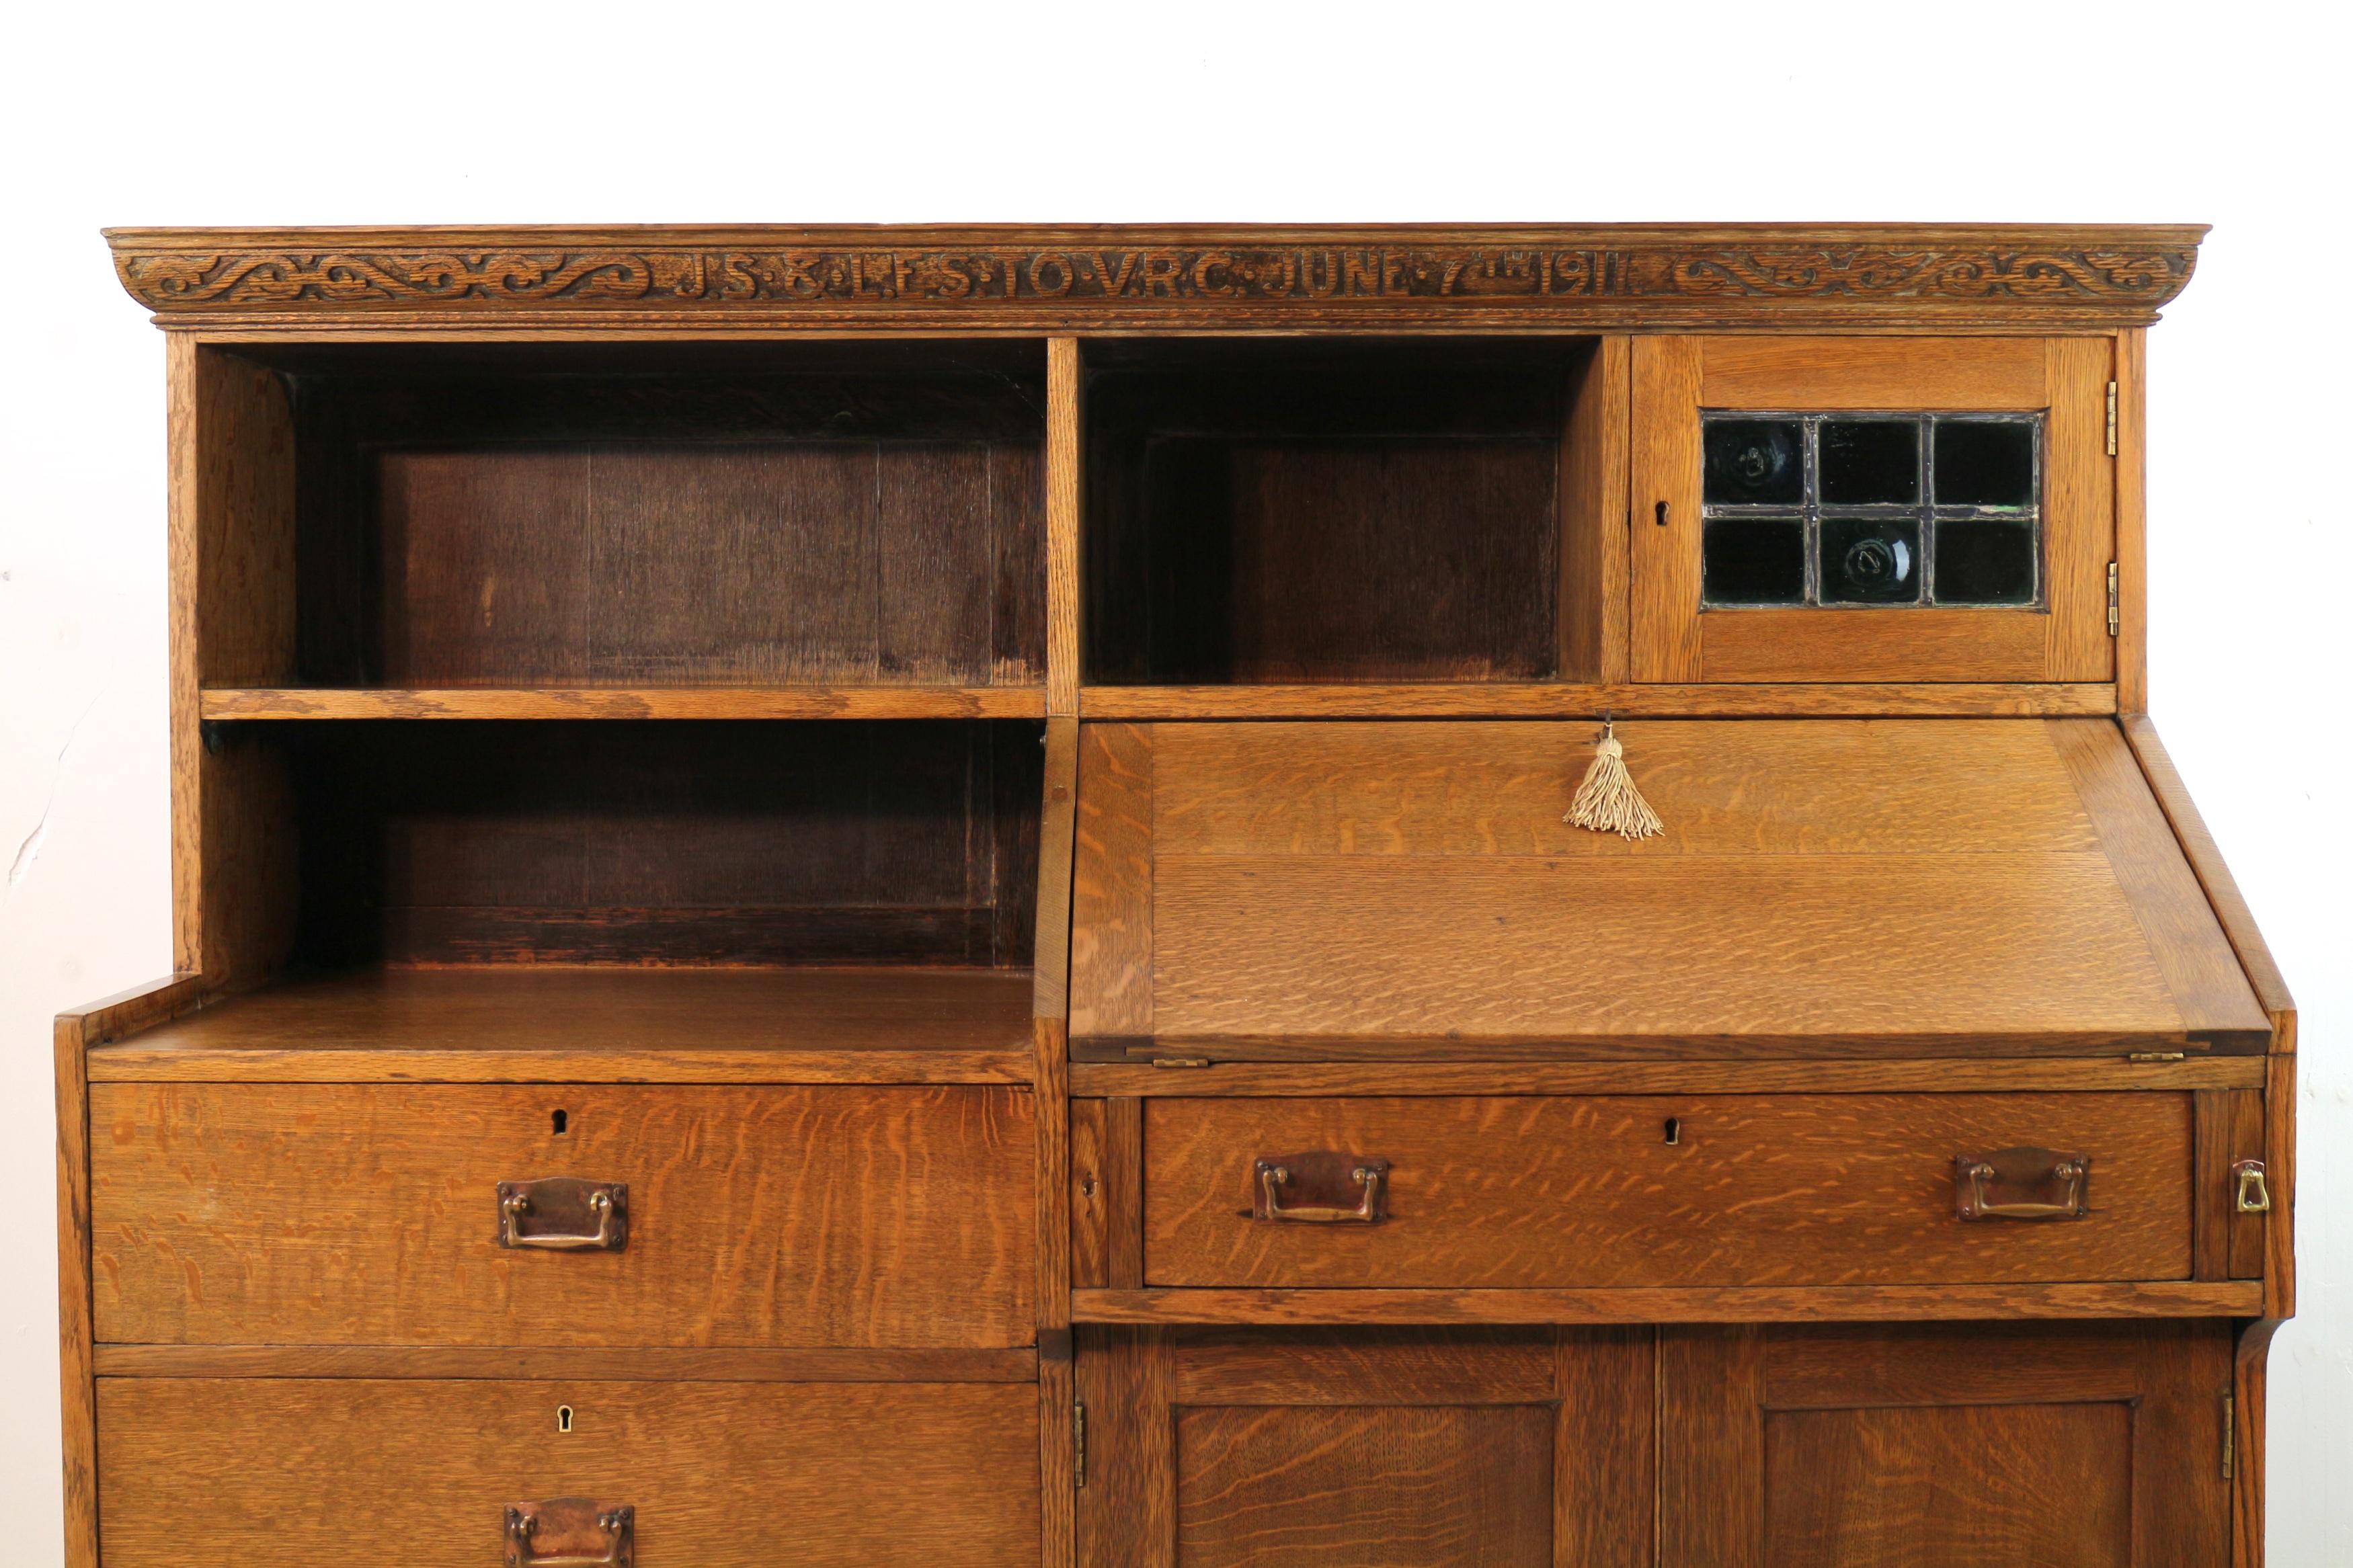 An attractive Arts & Crafts oak motto style bureau bookcase in golden quarter-sawn oak firmly attributed to Liberty & Co. of London. Featuring a moulded carved cornice with inscription ‘J.S. & L.E.S. TO V.R.C. JUNE 7TH 1911’ above a leaded green